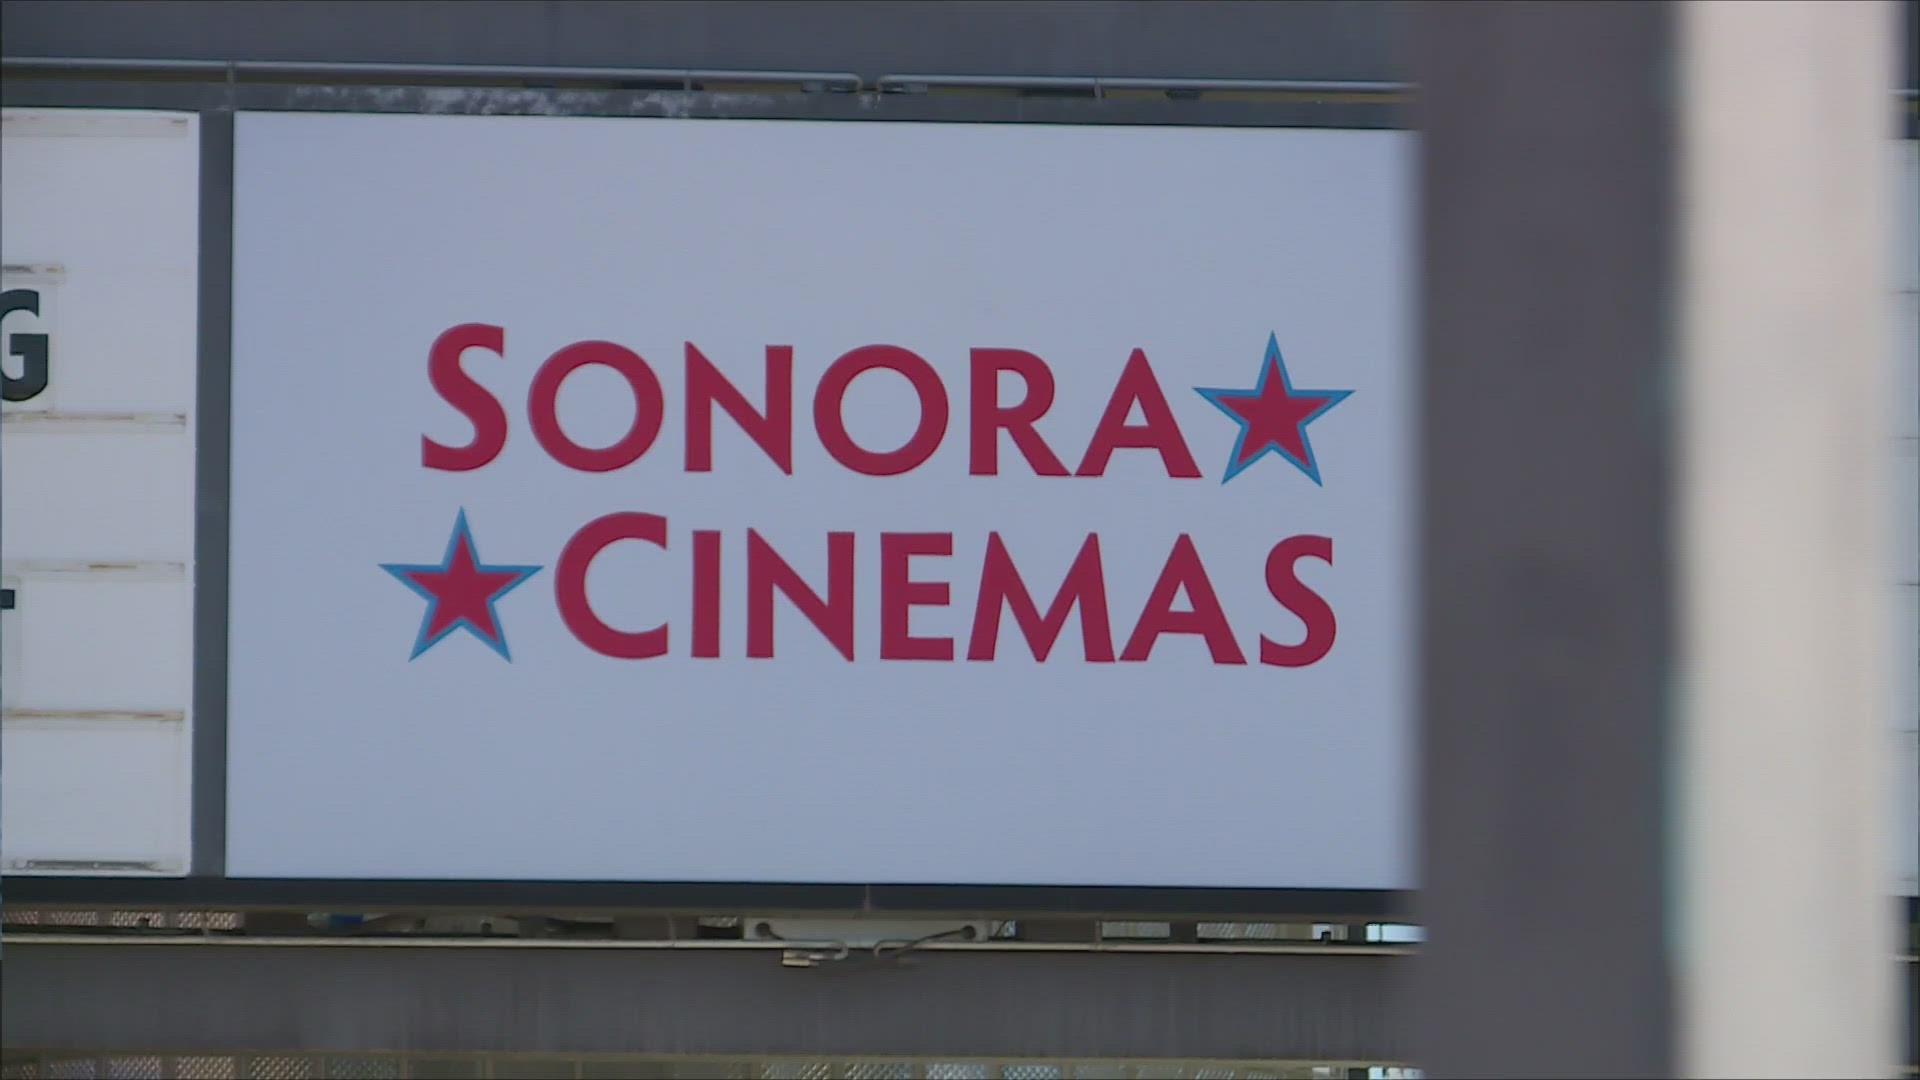 The much-loved family-owned movie theater chain closed last month, but at least one of the locations will get a new lease on life thanks to Sonora Cinemas.